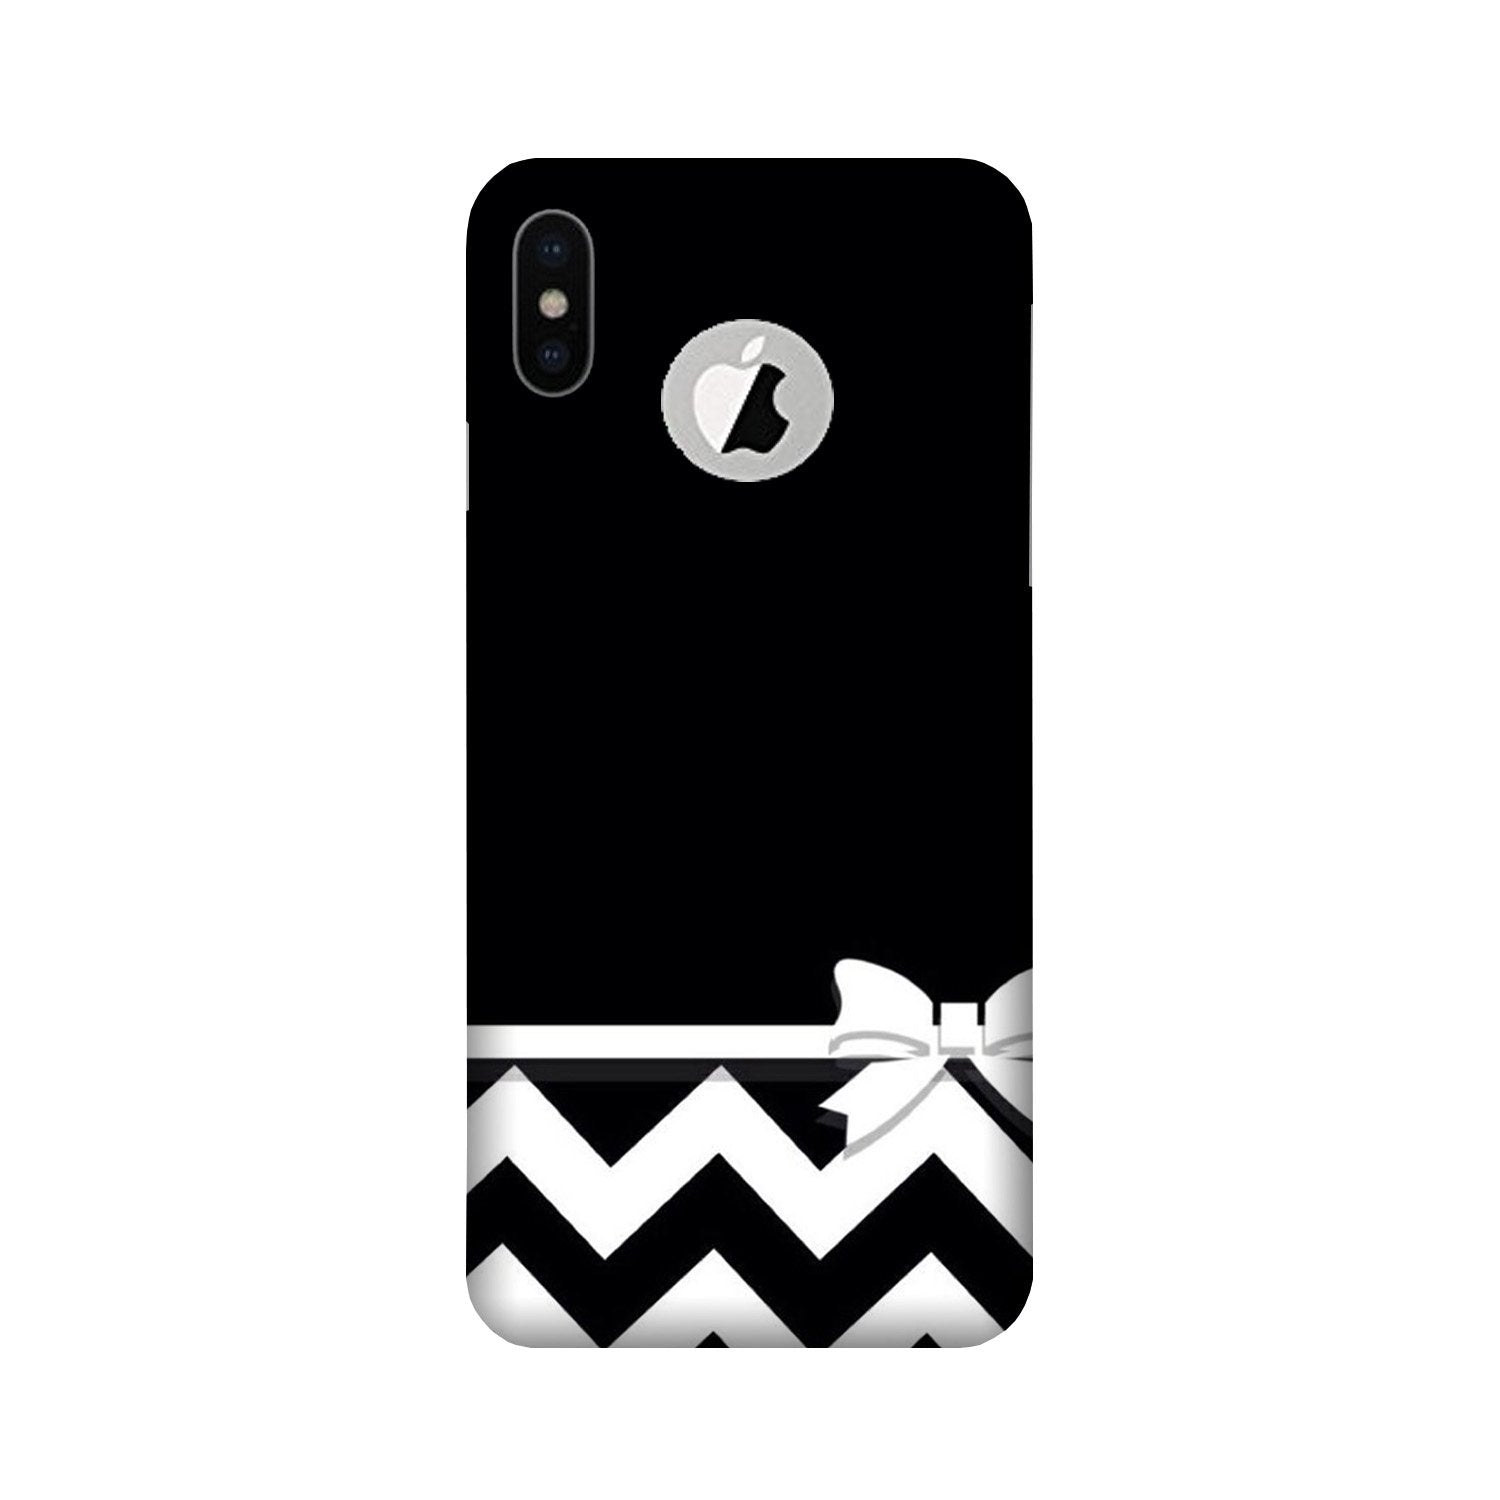 Gift Wrap7 Case for iPhone X logo cut